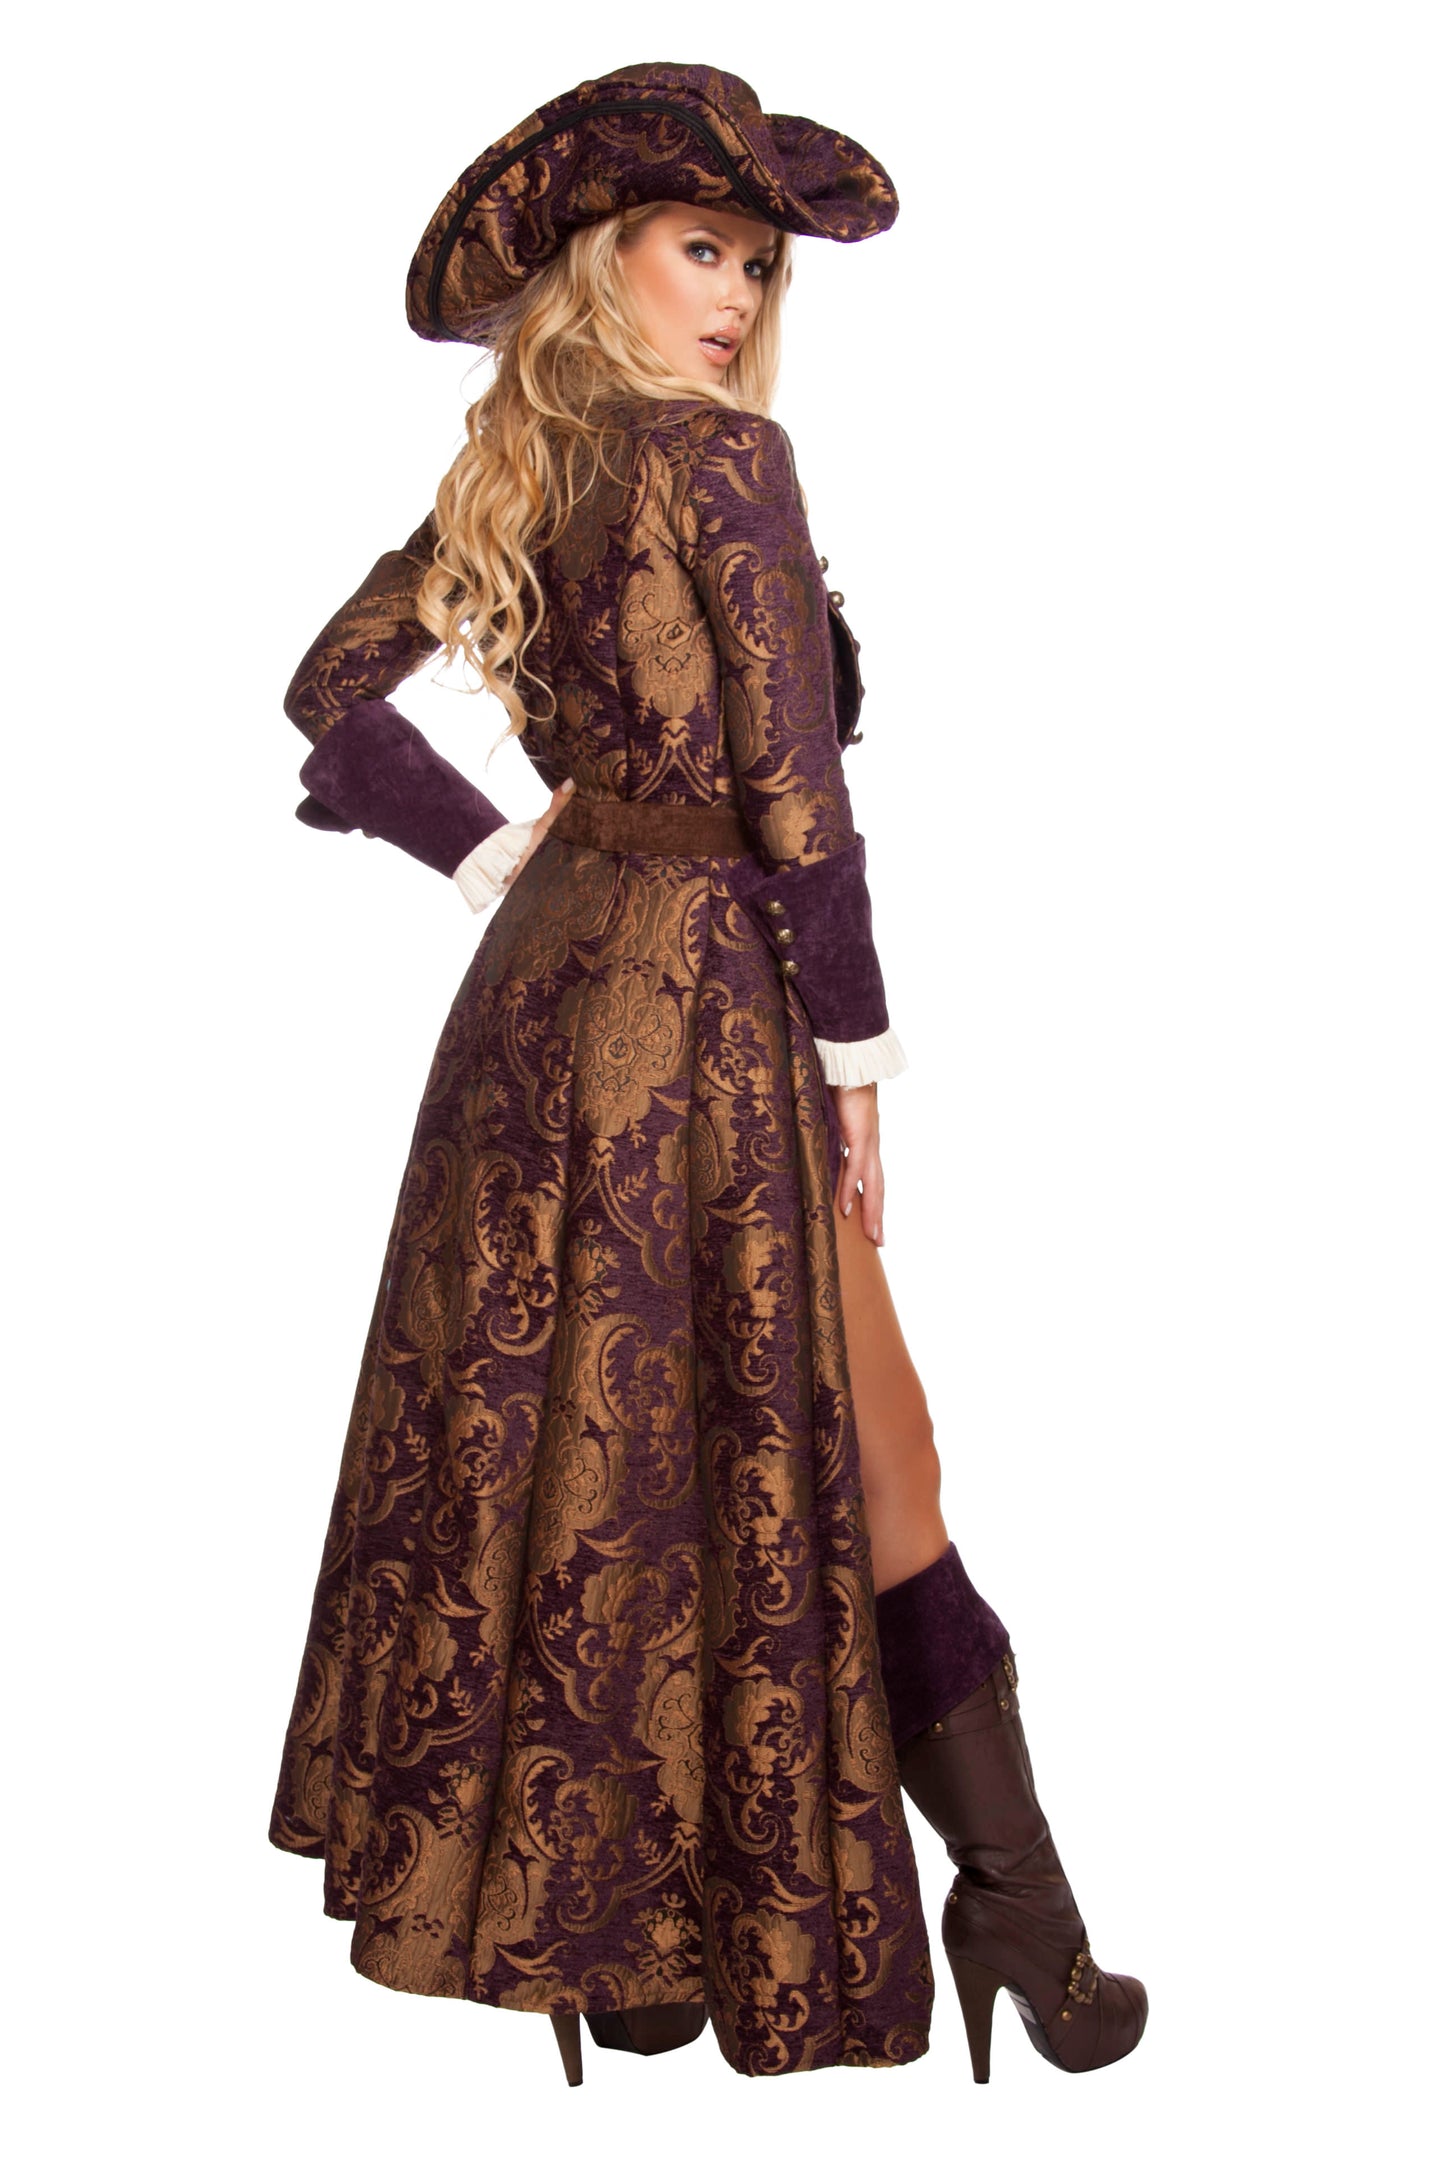 Decadent Pirate Diva by ROMA in Size S, M, L, or XL